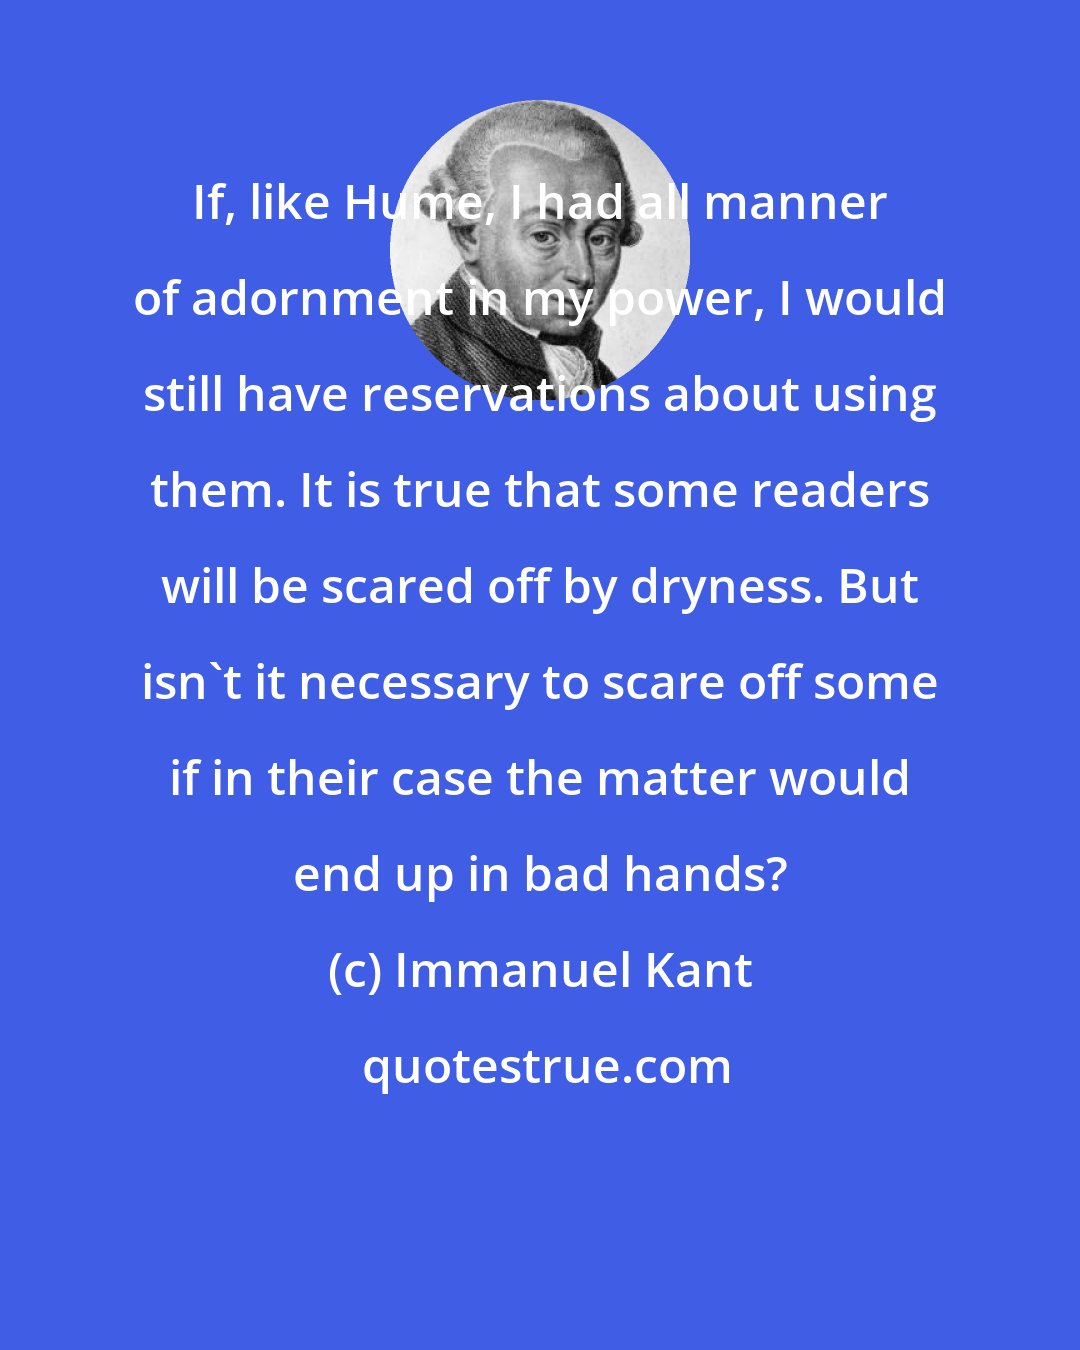 Immanuel Kant: If, like Hume, I had all manner of adornment in my power, I would still have reservations about using them. It is true that some readers will be scared off by dryness. But isn't it necessary to scare off some if in their case the matter would end up in bad hands?